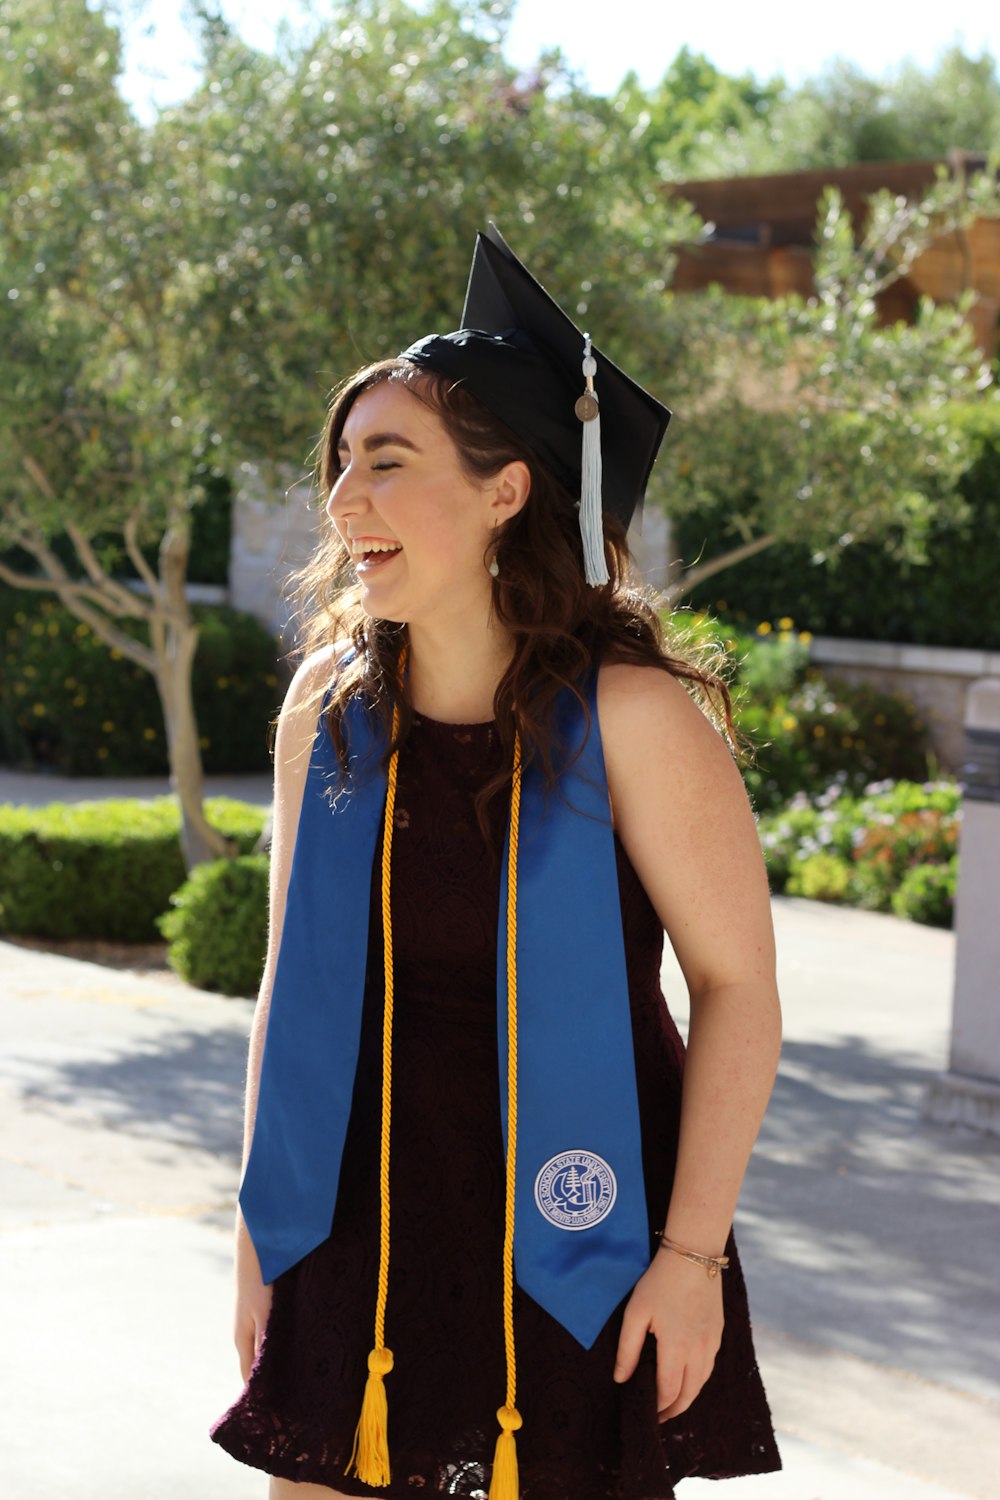 woman in blue and black academic dress standing on road during daytime